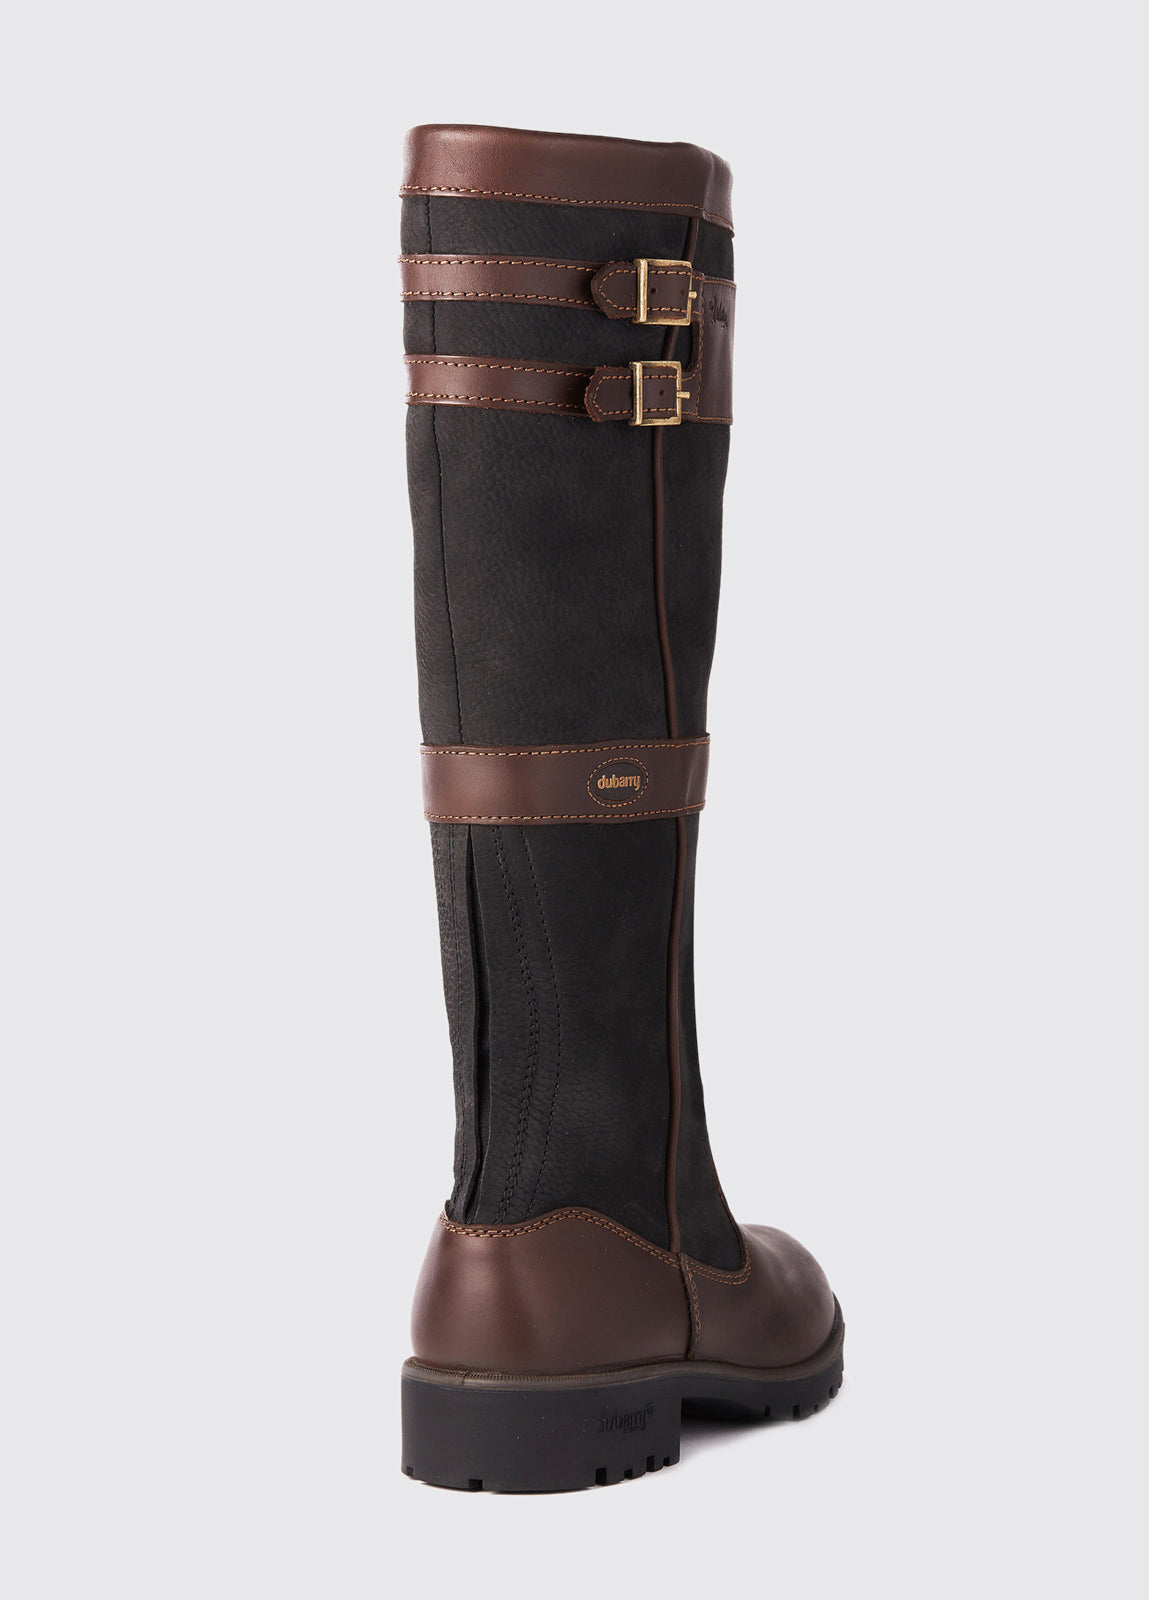 Dubarry Womens Longford Country Boot - Black/Brown